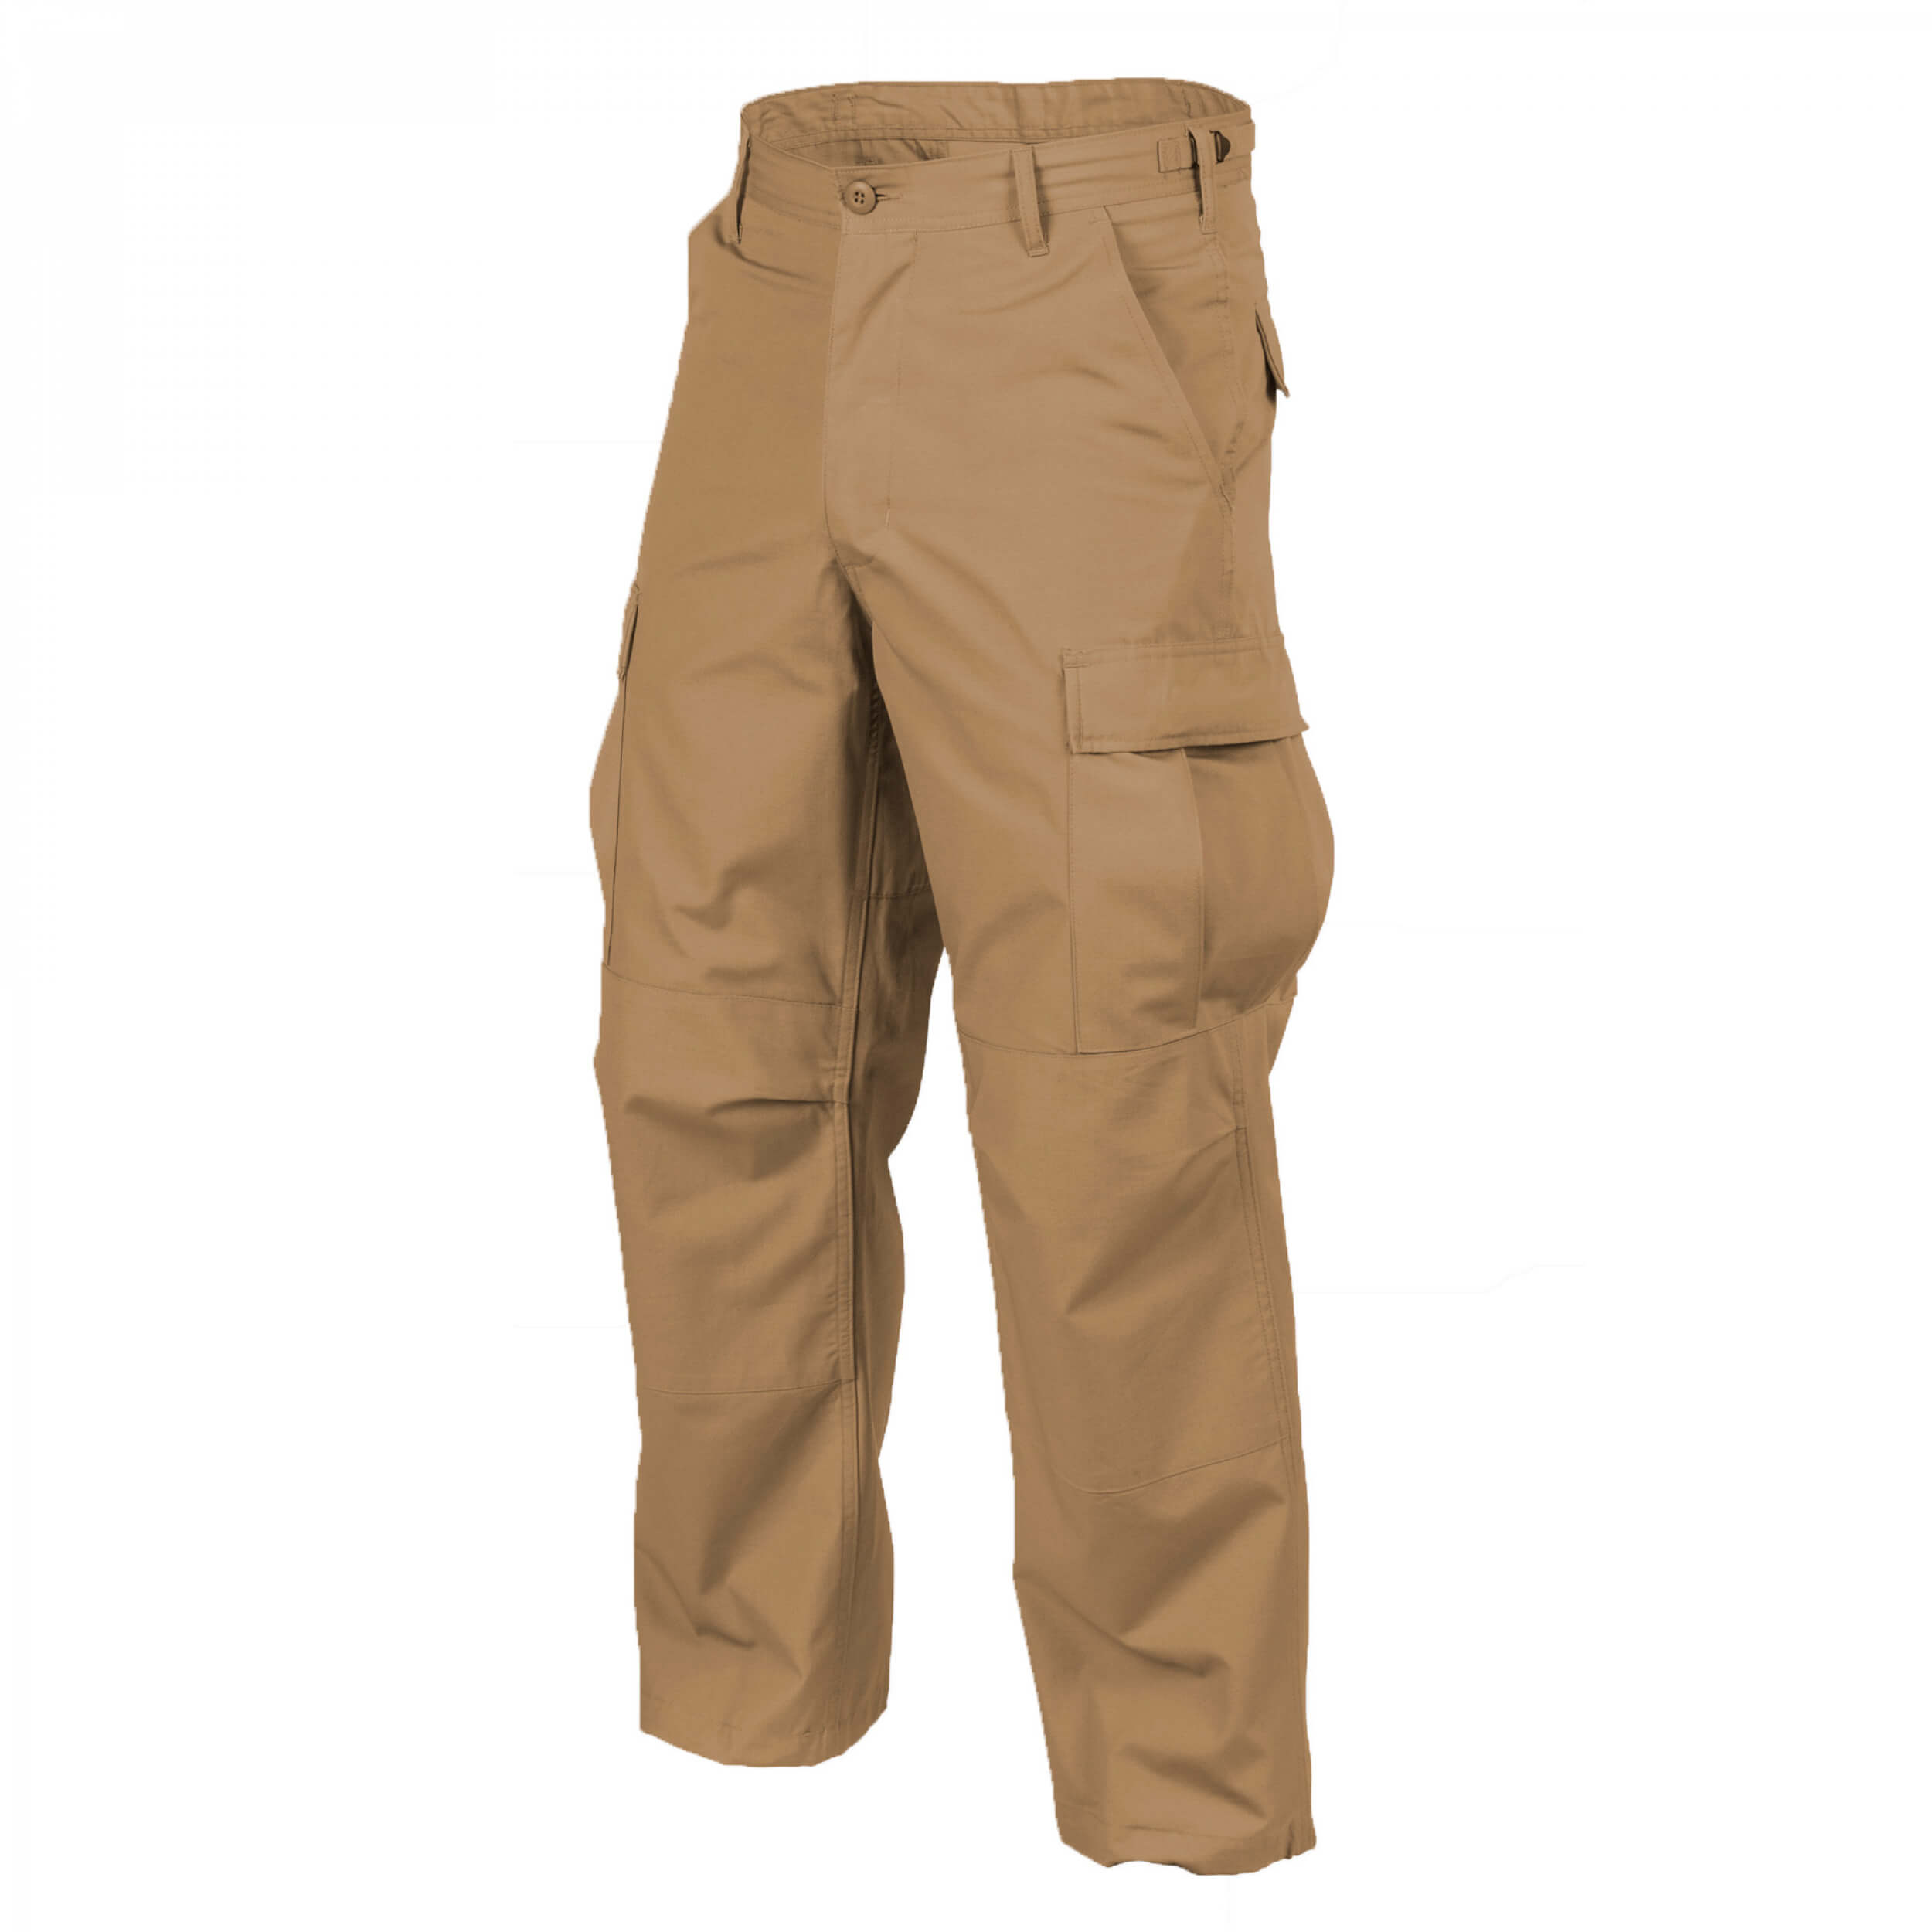 Helikon-Tex BDU Trousers - PolyCotton Ripstop - Coyote